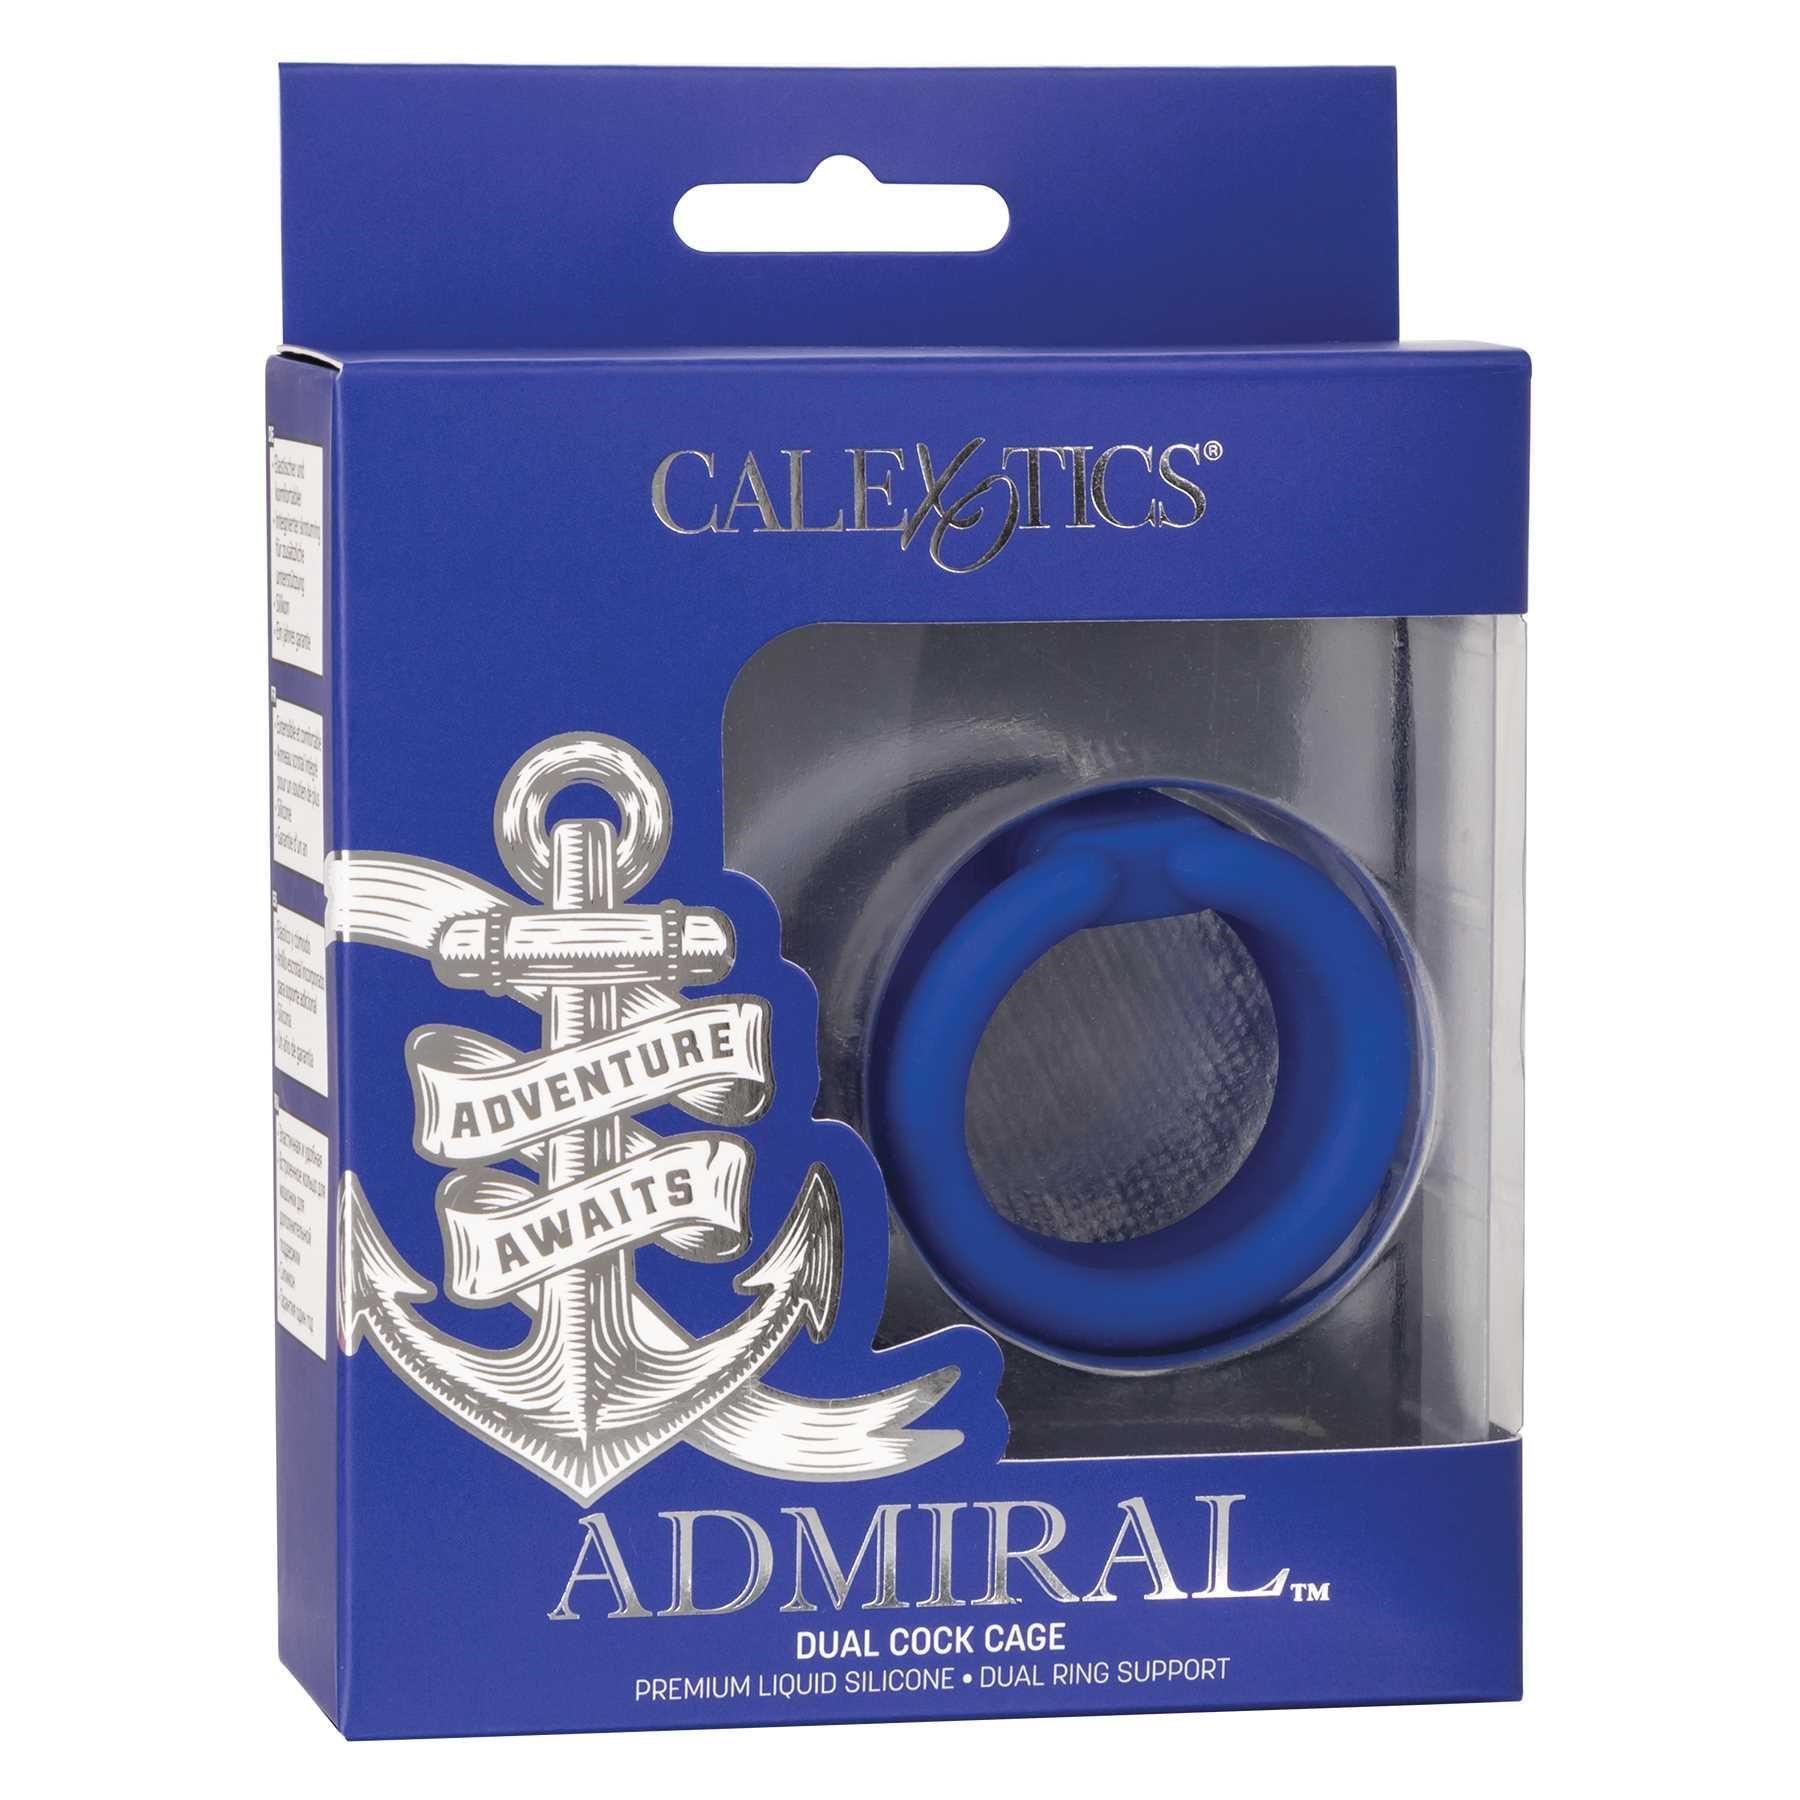 Admiral Dual Cock Cage front box packaging